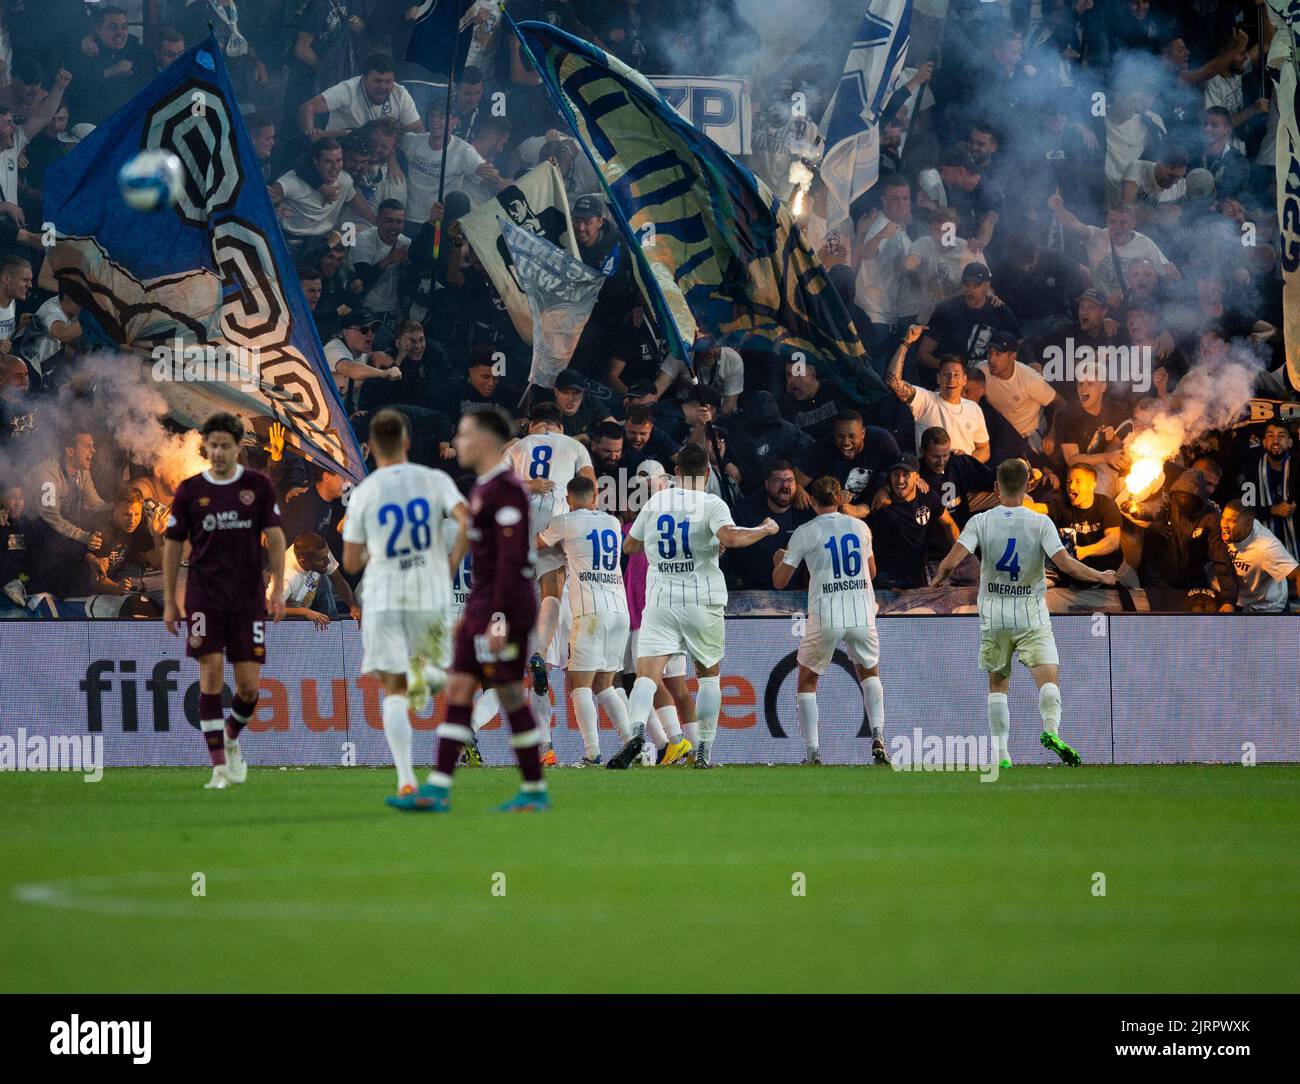 Edinburgh, UK. 25th Aug, 2022. Europa League Play-Off - Heart of Midlothian FC v Fc Zurich 25/08/2022. Hearts play host to FC Zurich in the Europa League Play-Offs at Tynecastle Park, Edinburgh, Midlothian, UK. Pic shows: Zurich celebrate after midfielder, Fabian Rohner, put the visitors 3-1 ahead on aggregate in the 80th minute. Credit: Ian Jacobs/Alamy Live News Stock Photo